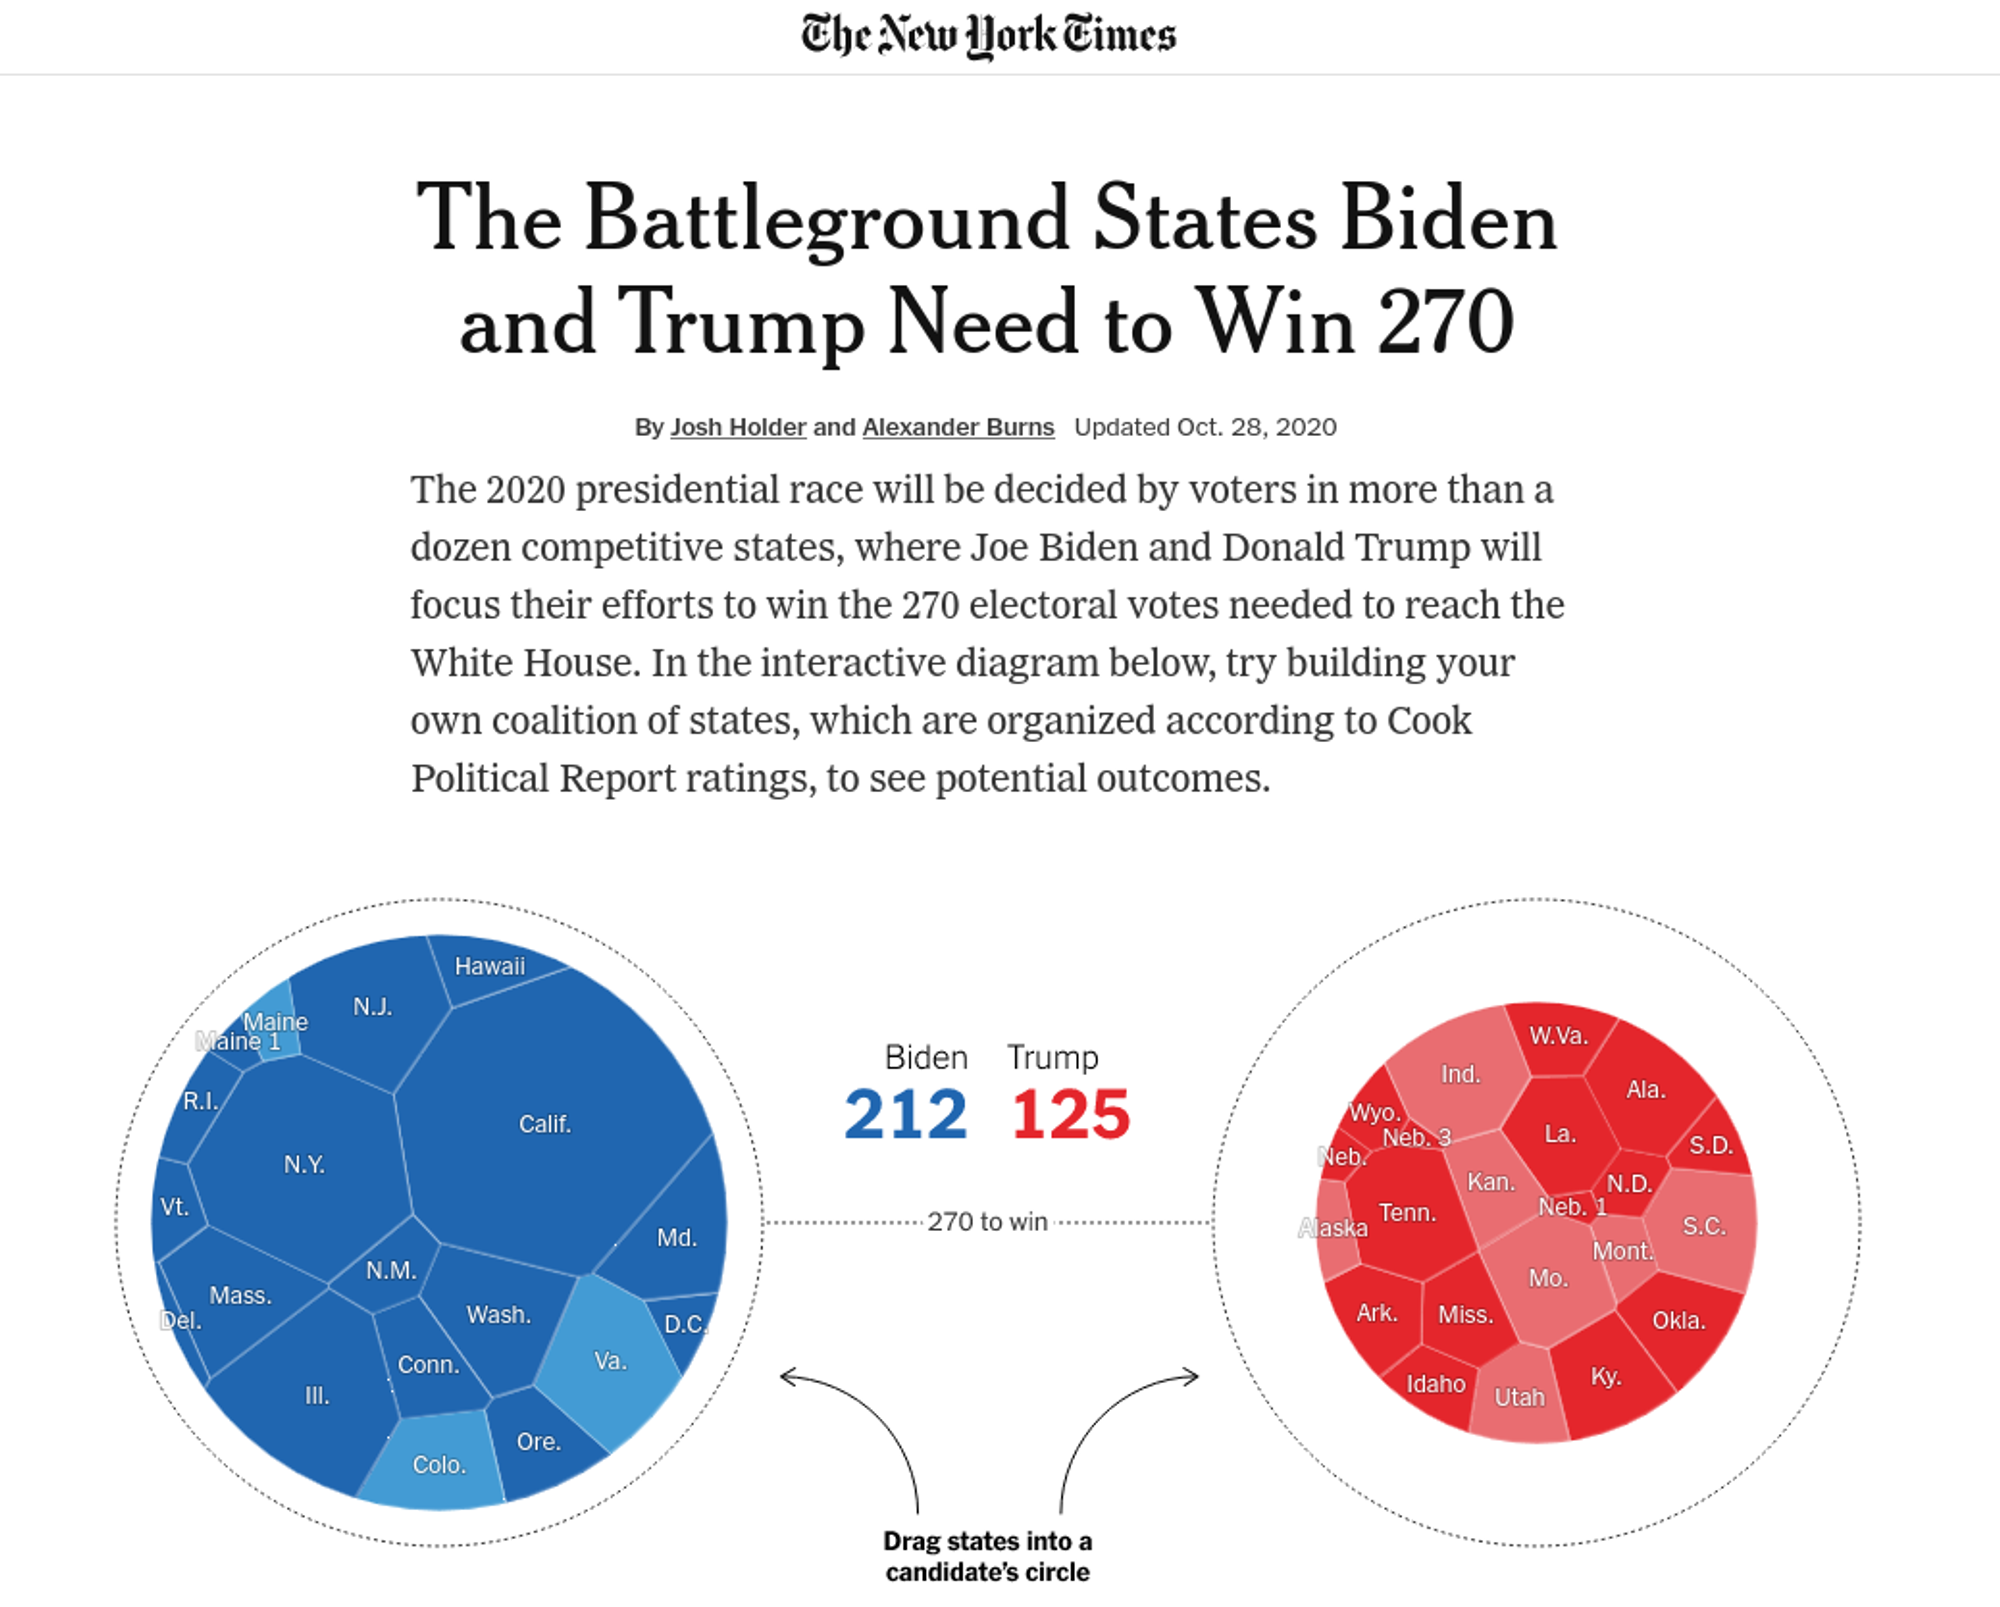 https://www.nytimes.com/interactive/2020/us/elections/electoral-college-battleground-states.html